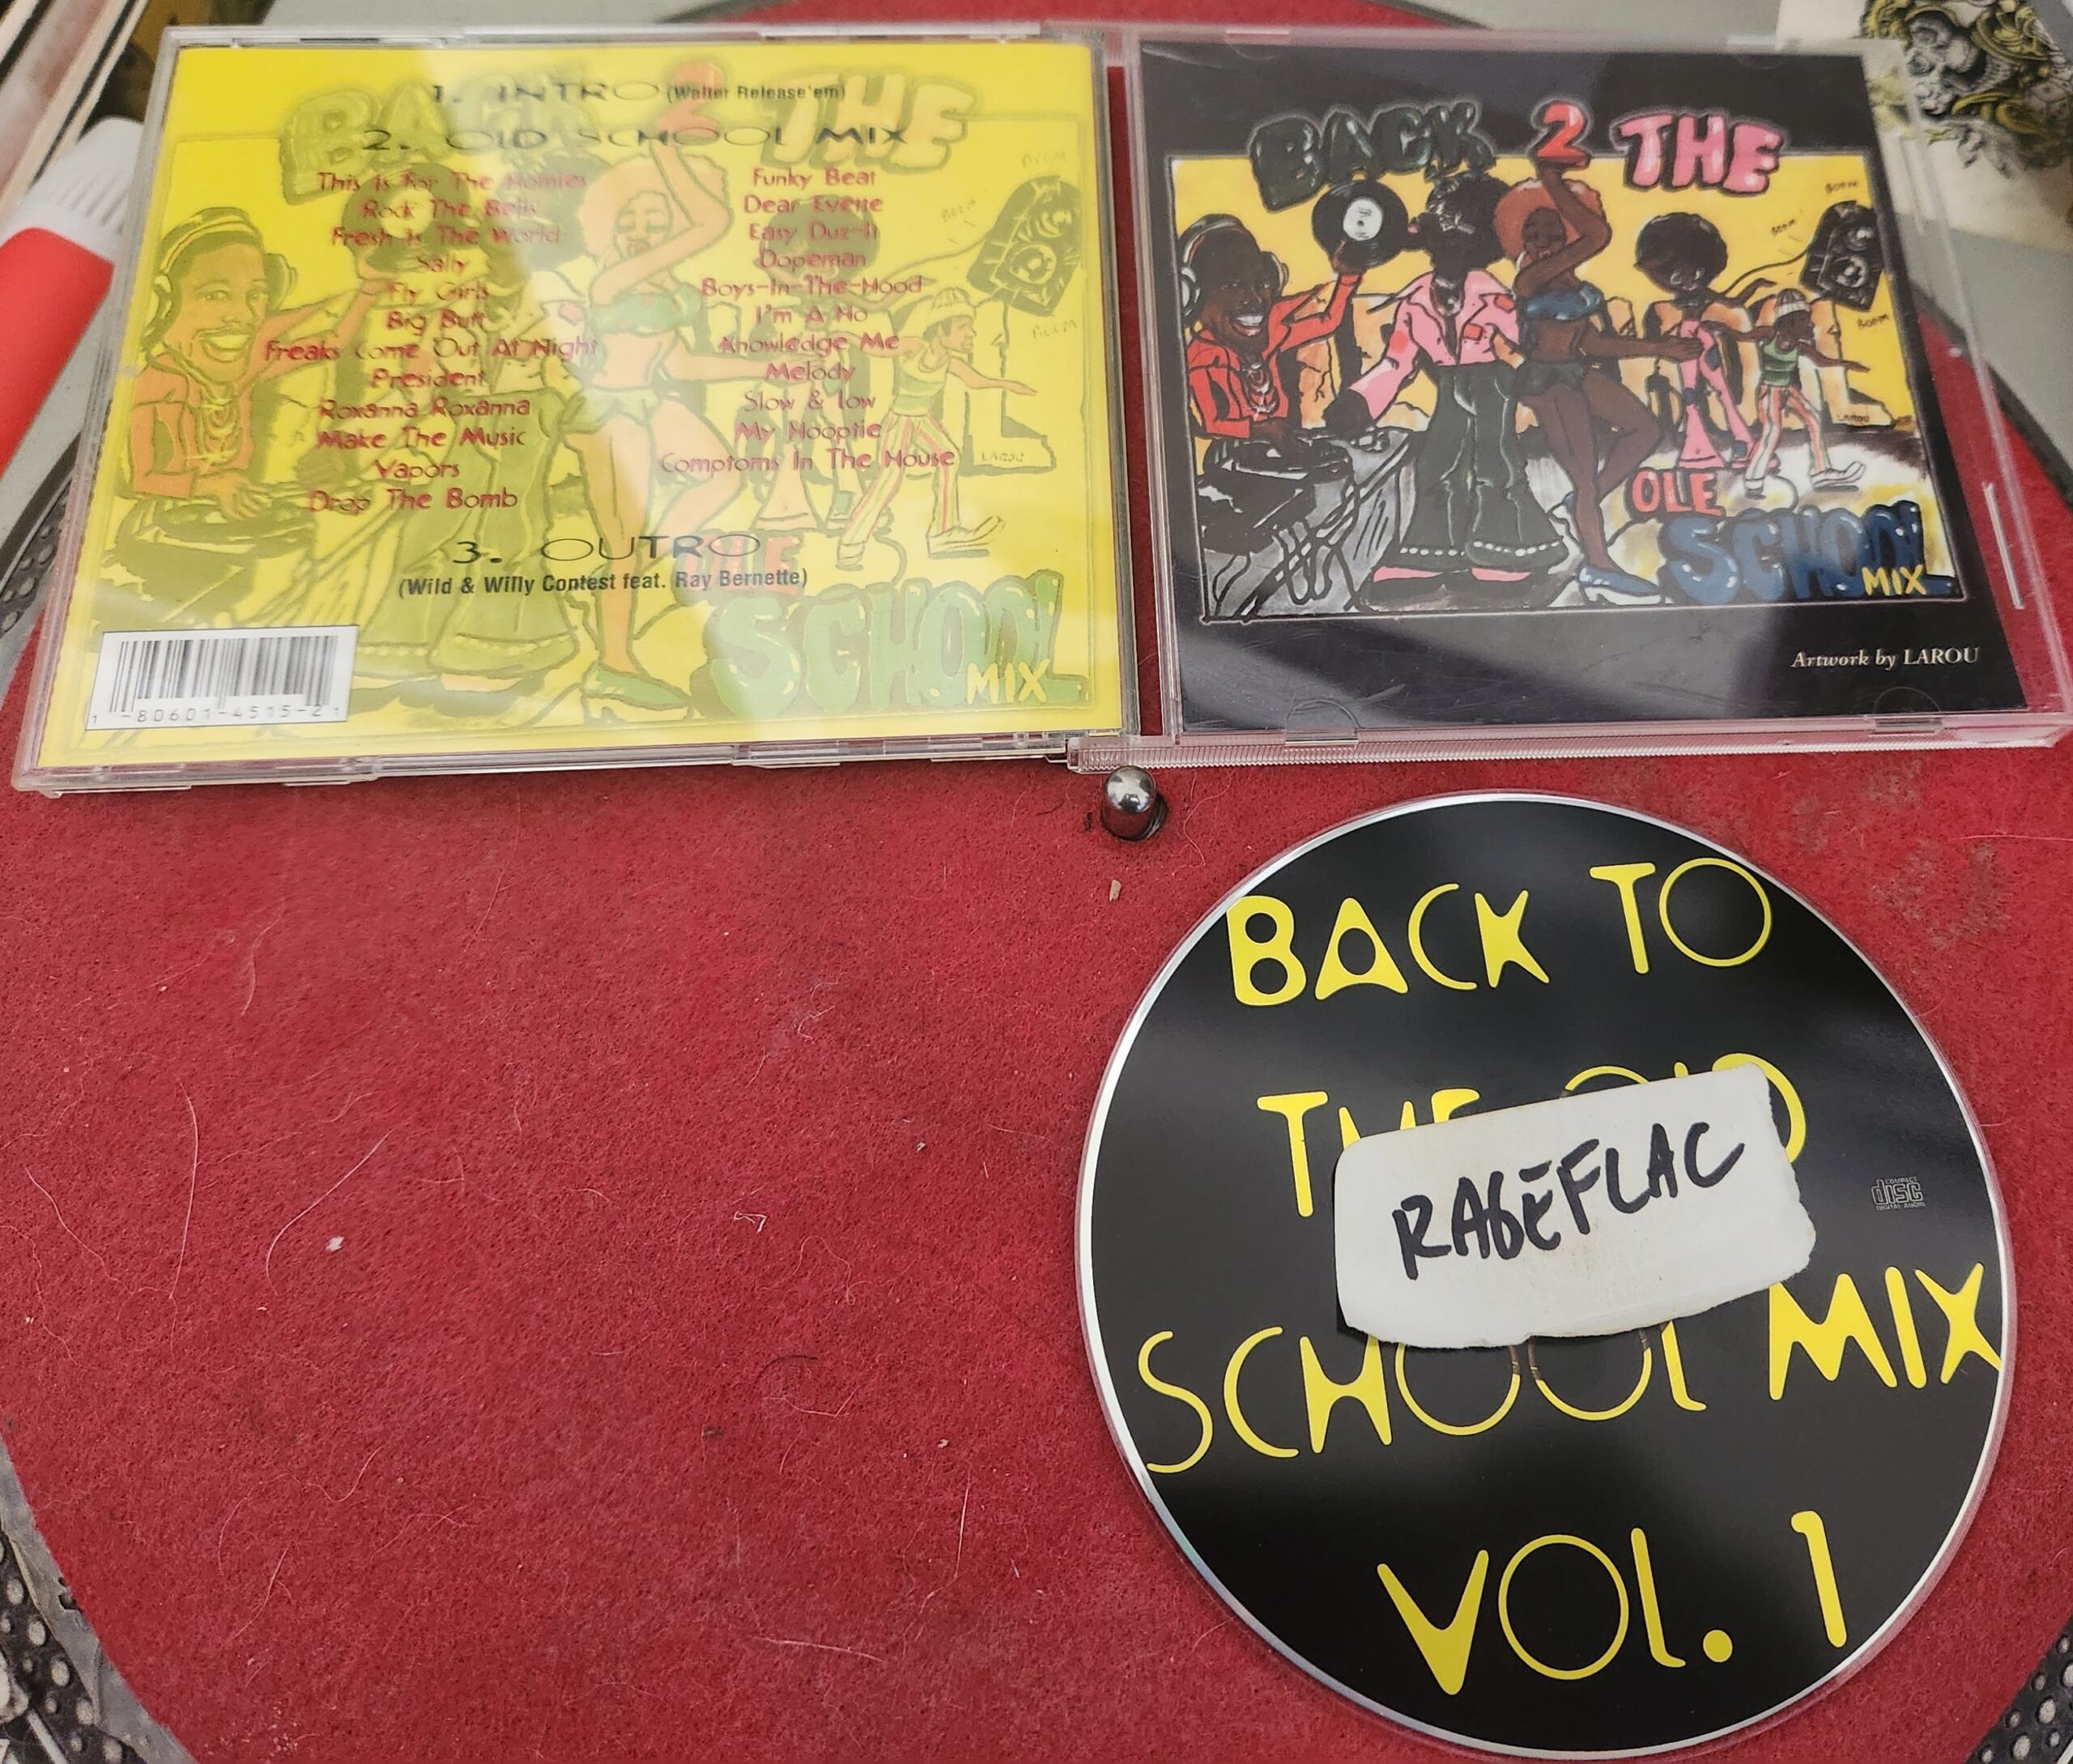 Walter_D-Back_To_The_Old_School_Mix_Vol._1-BOOTLEG-CD-199X-RAGEMP3 00-wal17